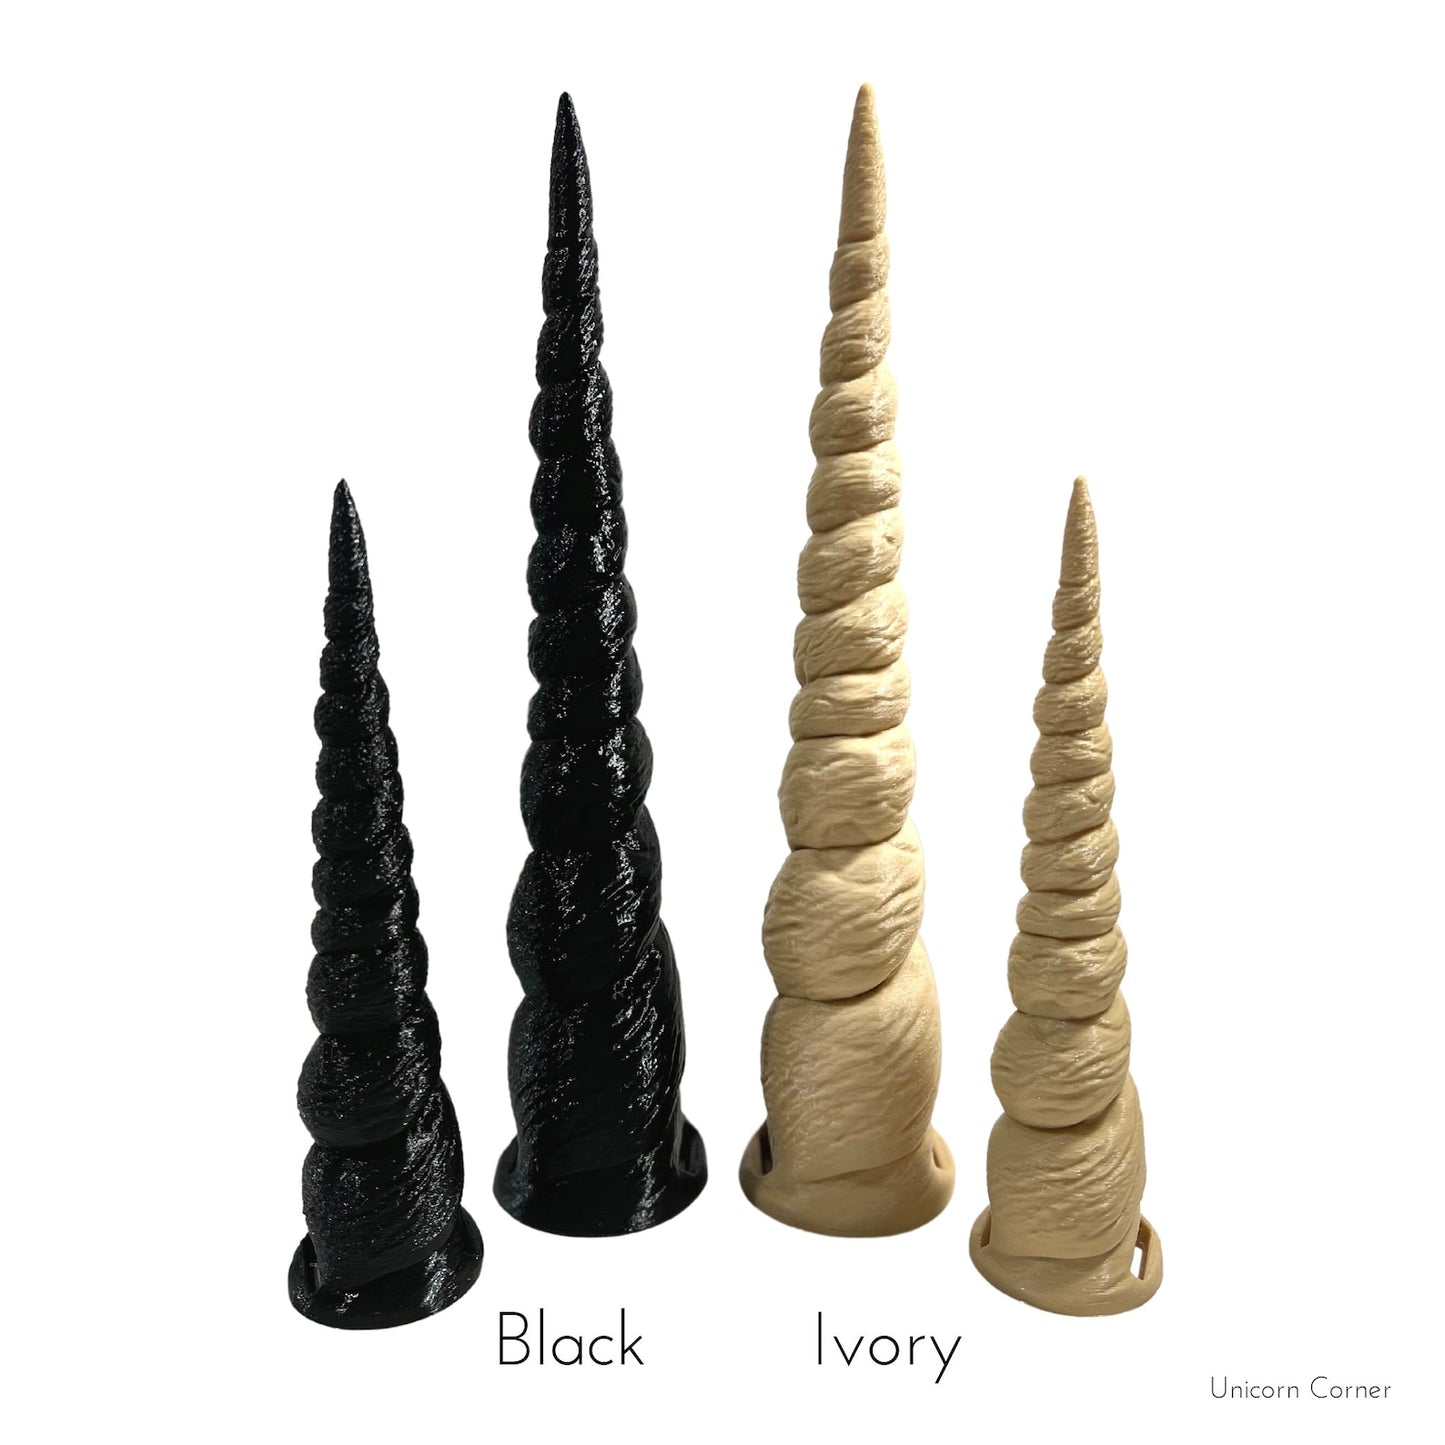 Textured Unicorn Horn for Horses and Ponies